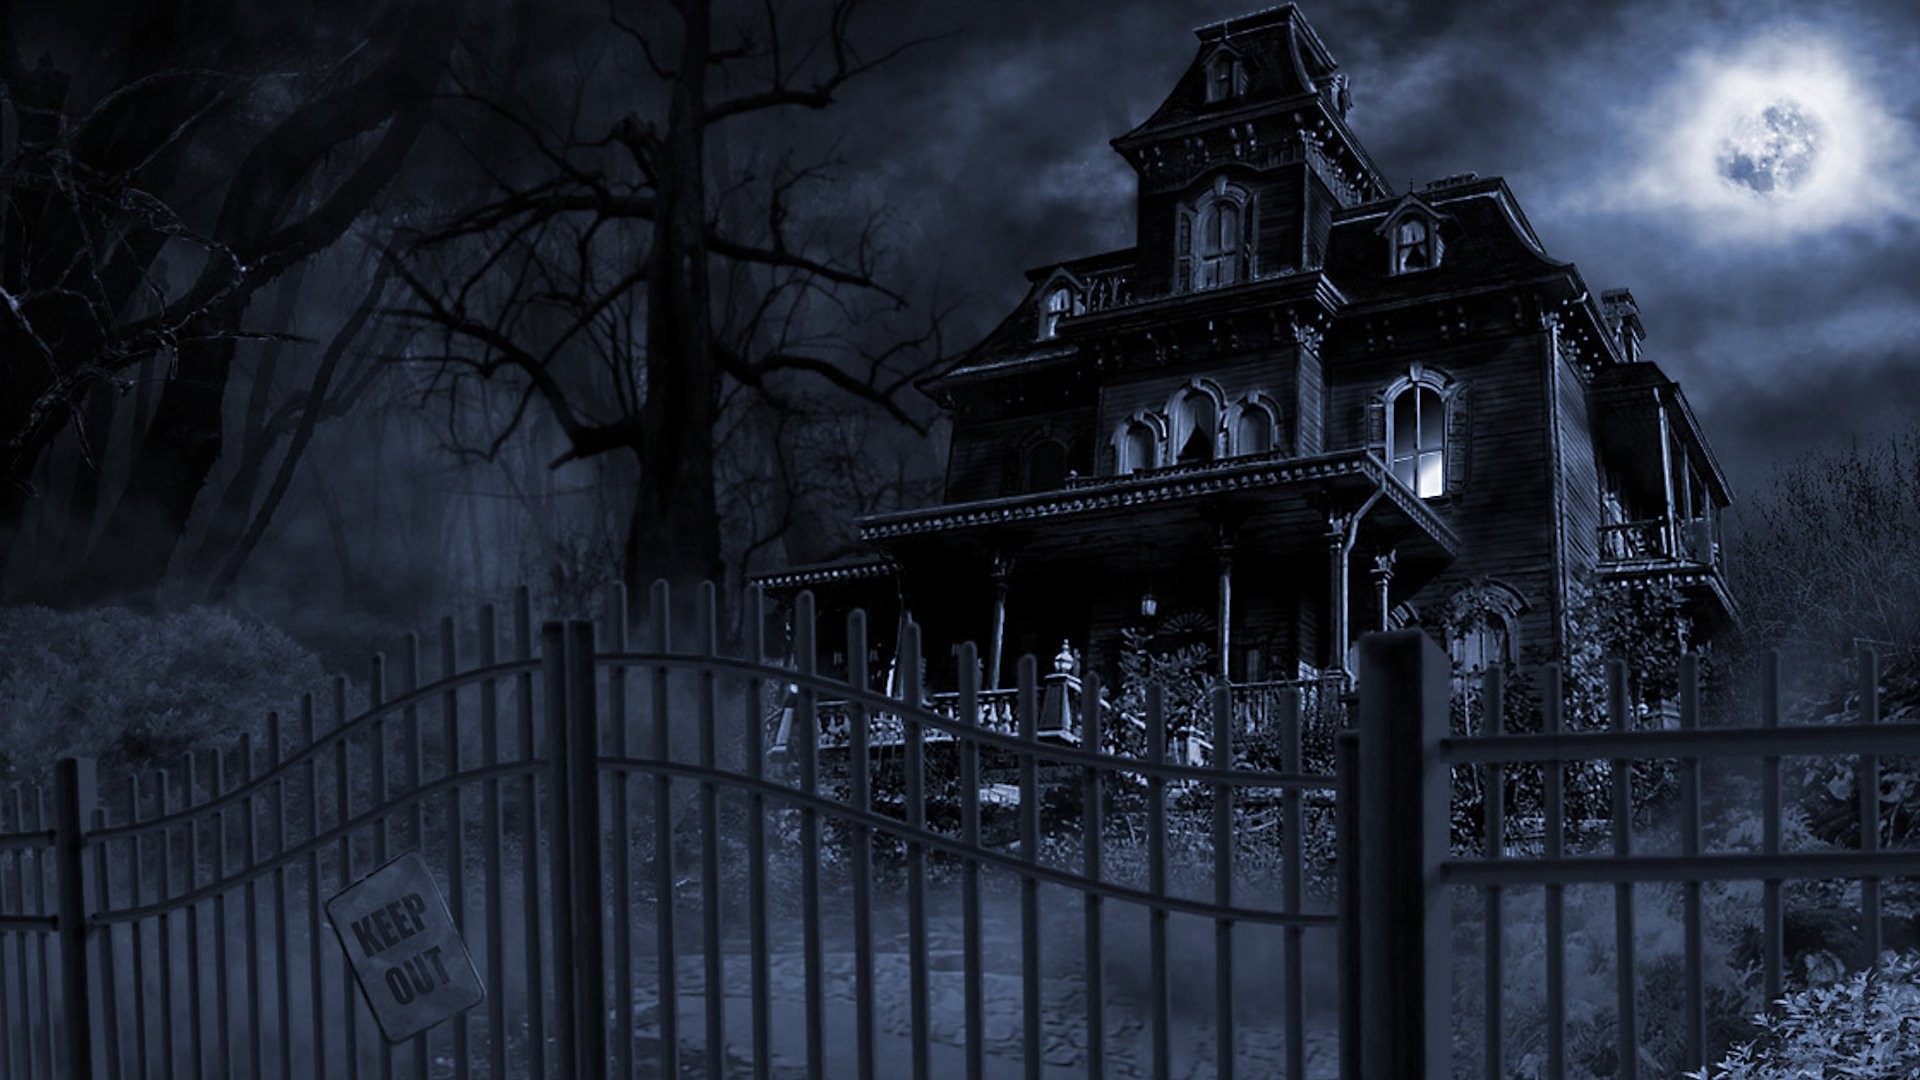 Gallery For > Spooky House Wallpapers